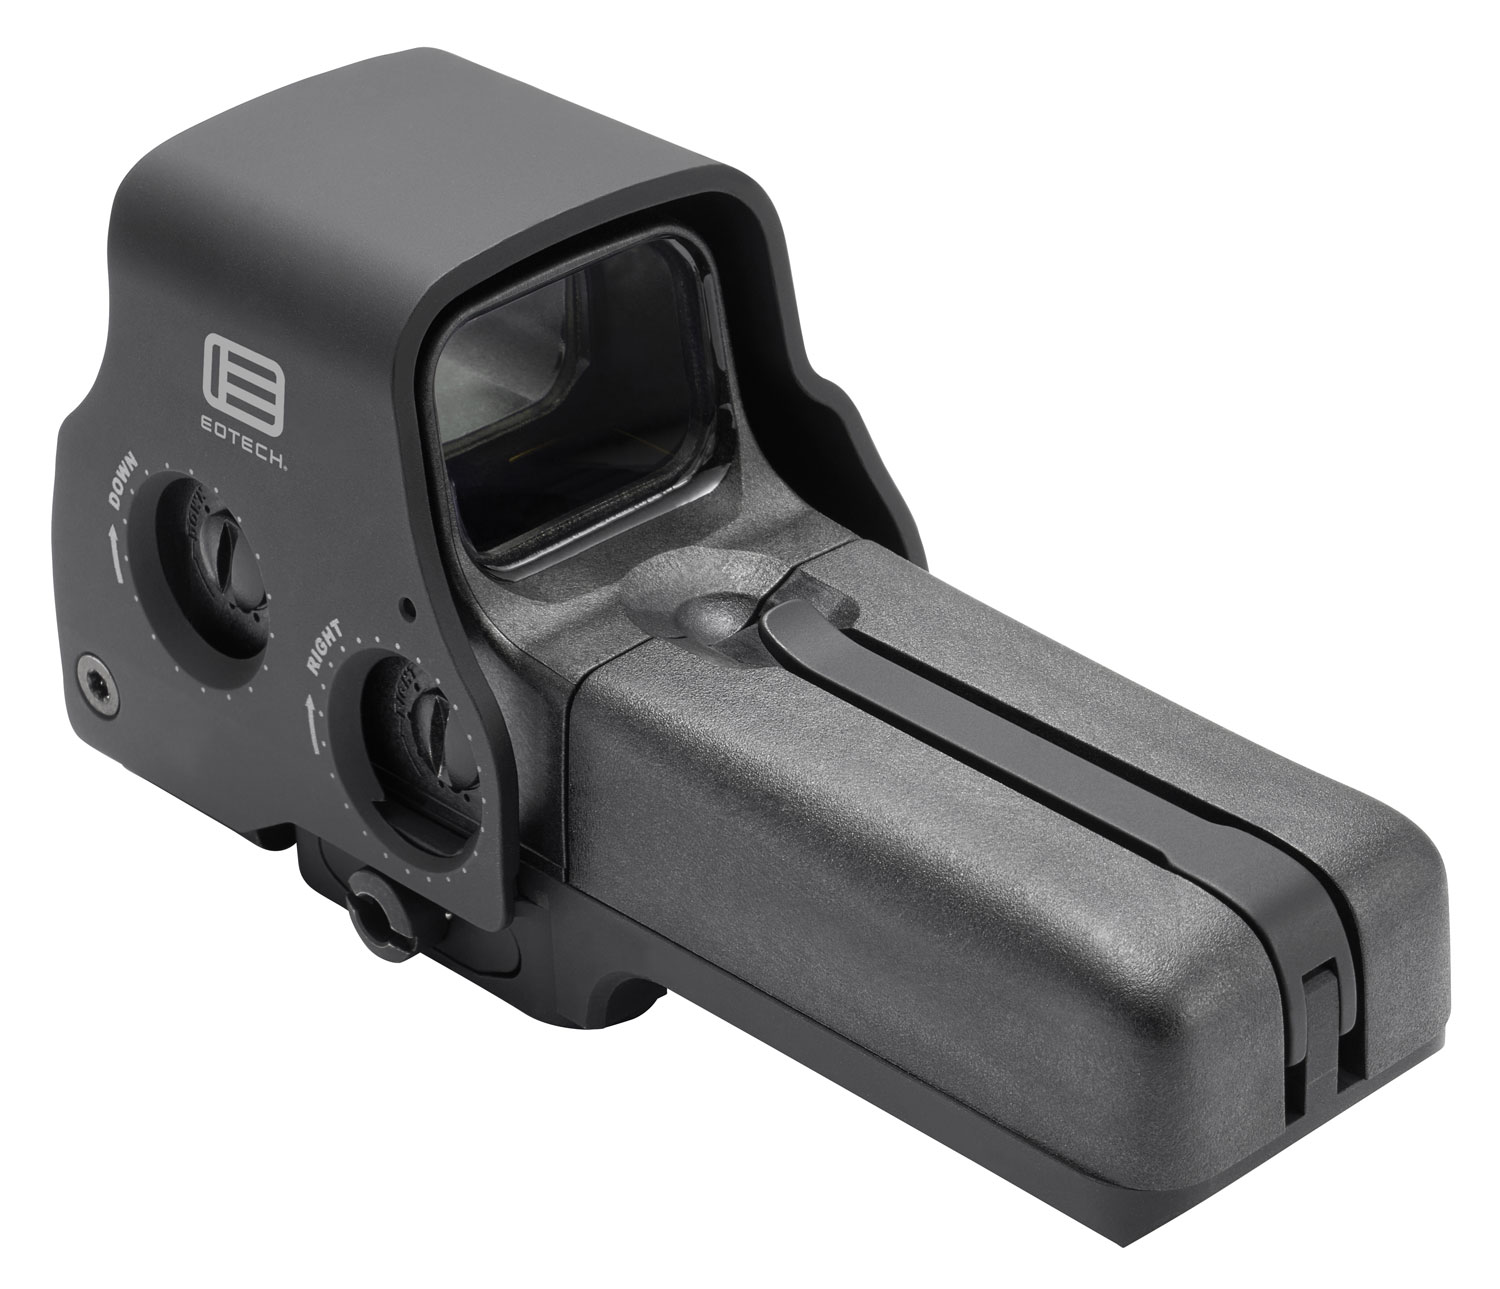 MODEL 558 SIDE BUTTON AA-BATT | HOLOGRAPHIC WEAPON SIGHT